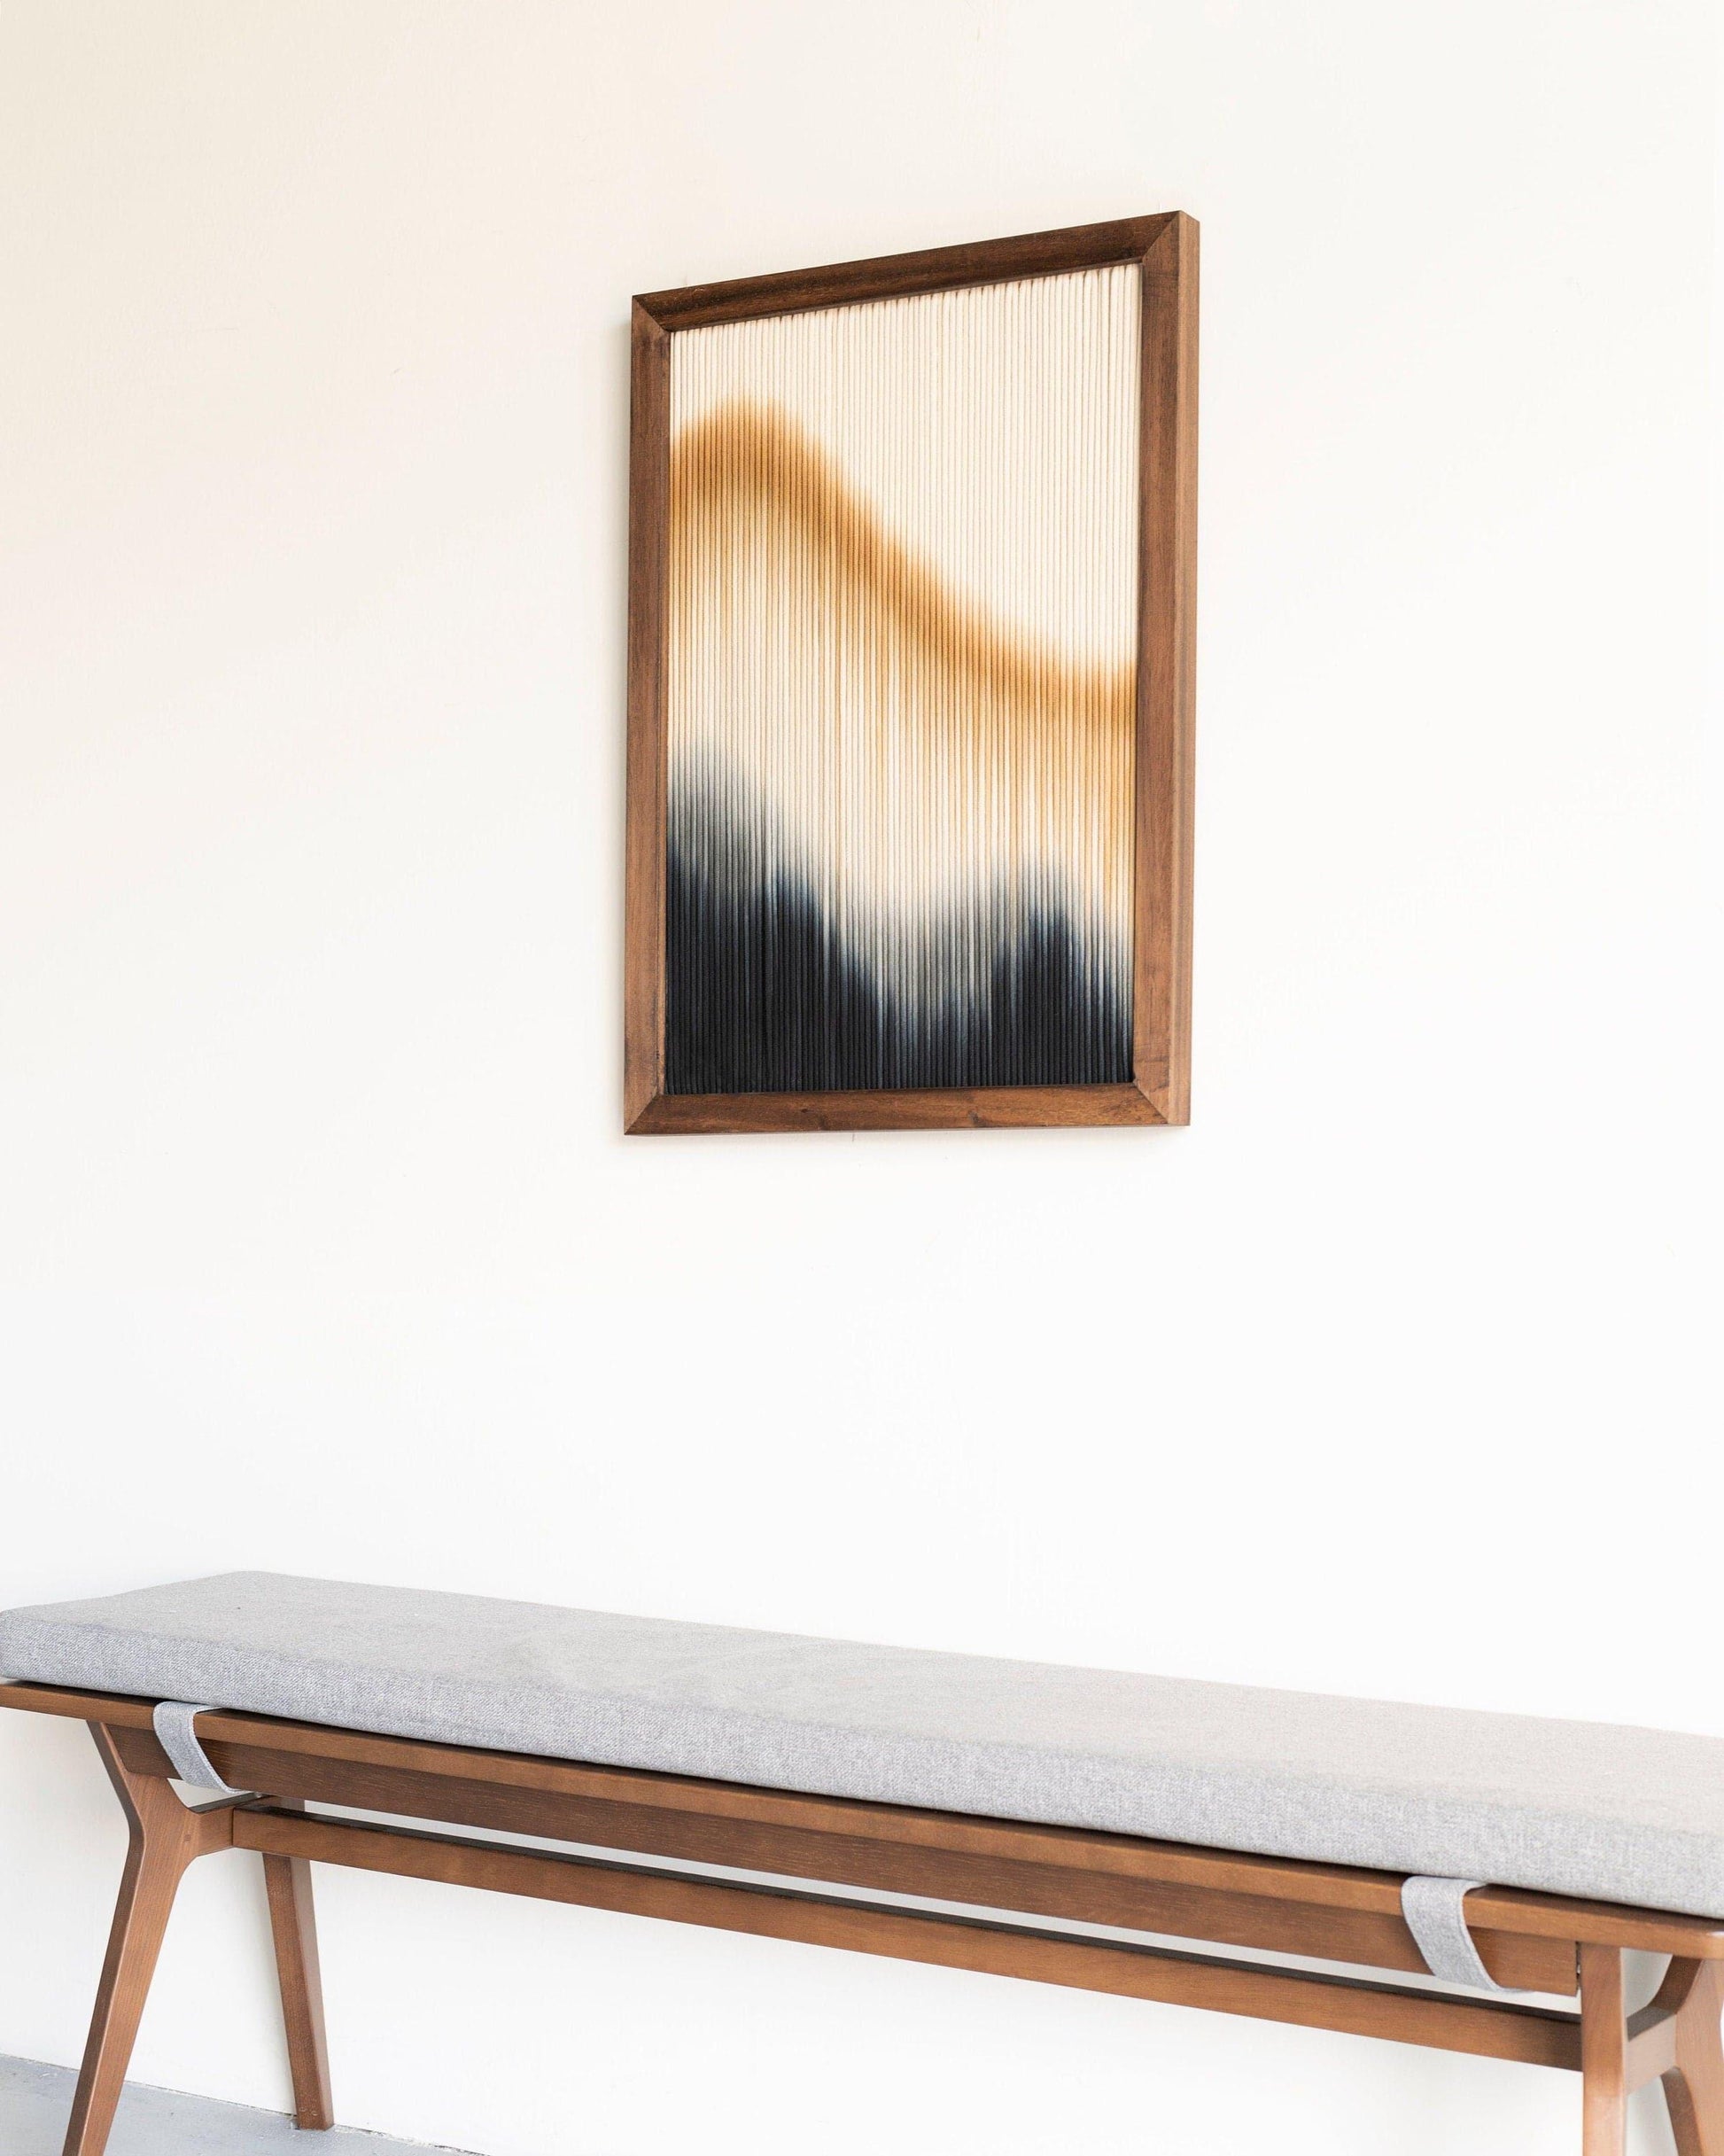 Framed Wall Decor Tapestry - FLOW III - MAIA HOMES